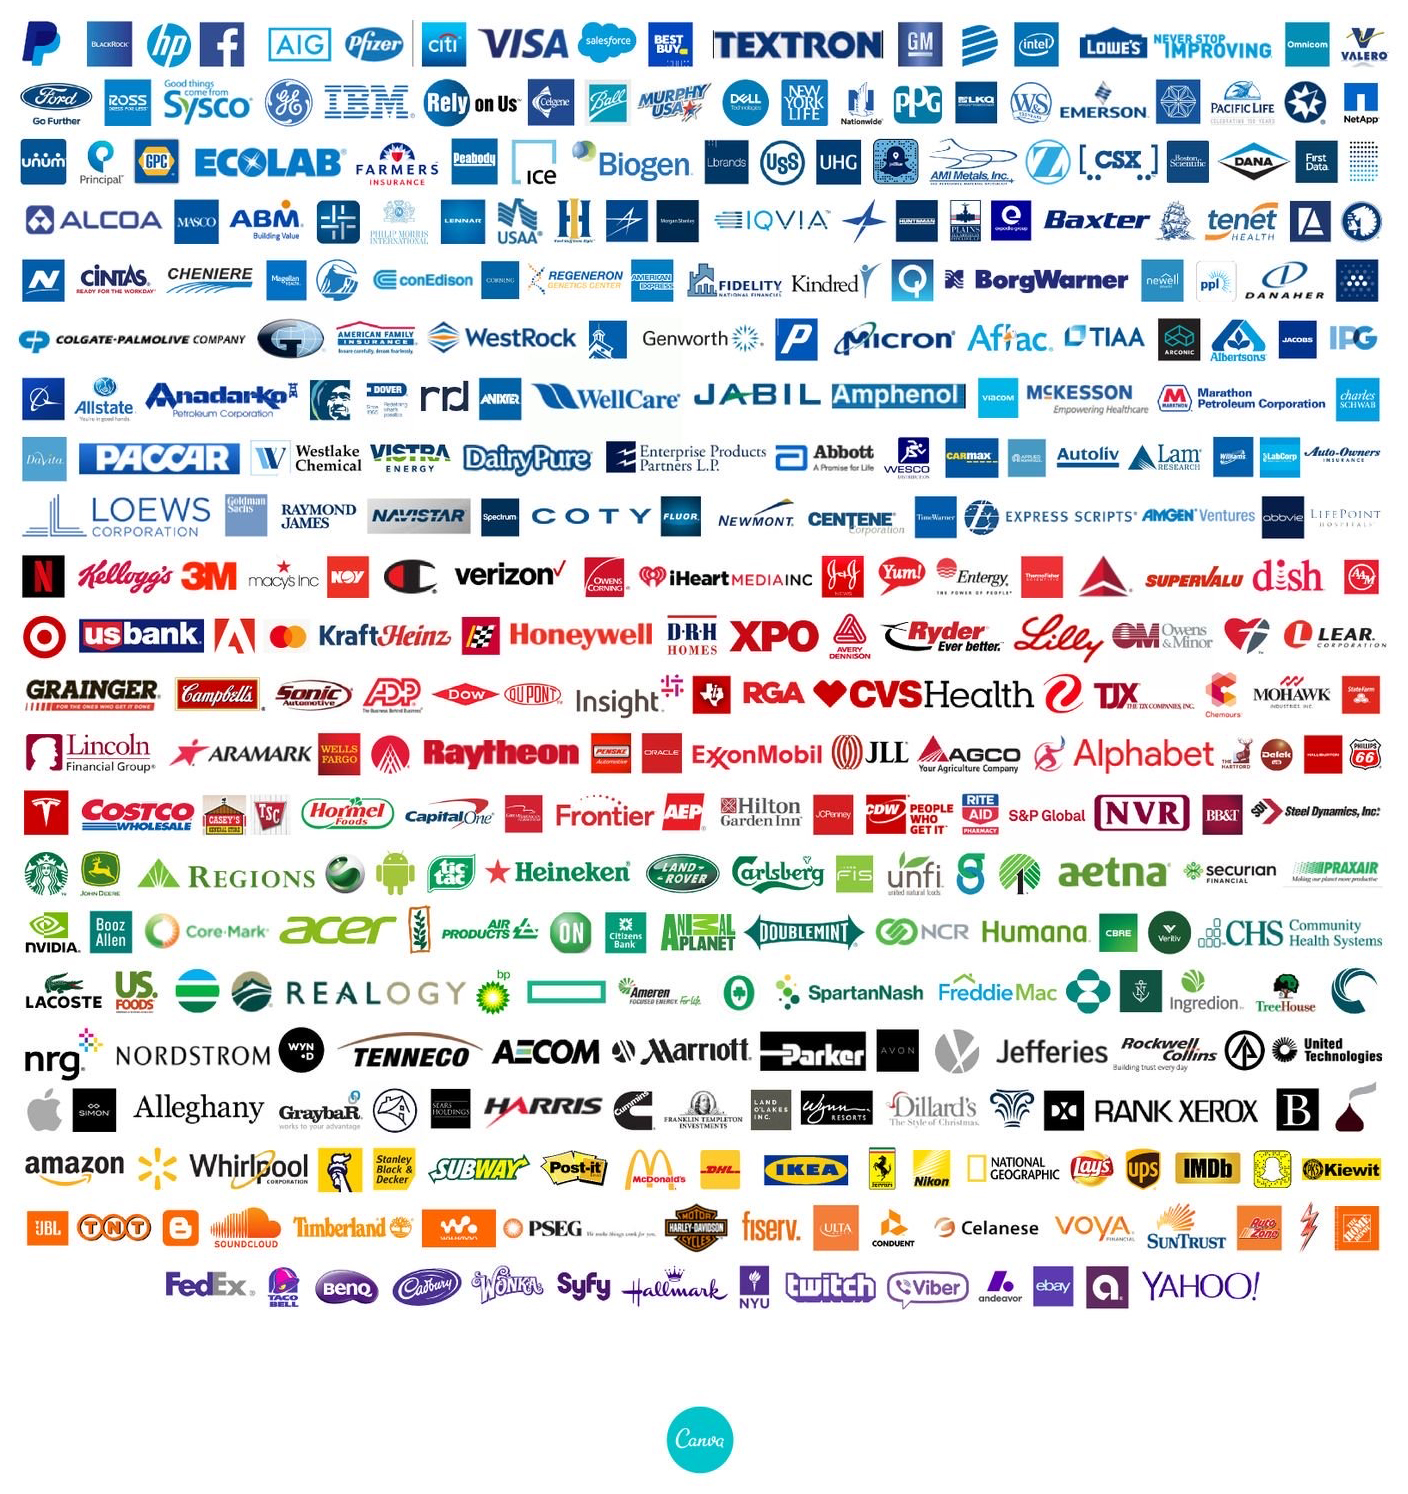 Blue is the most popular color in corporate branding among the Fortune 500 (photo credit: Canva).